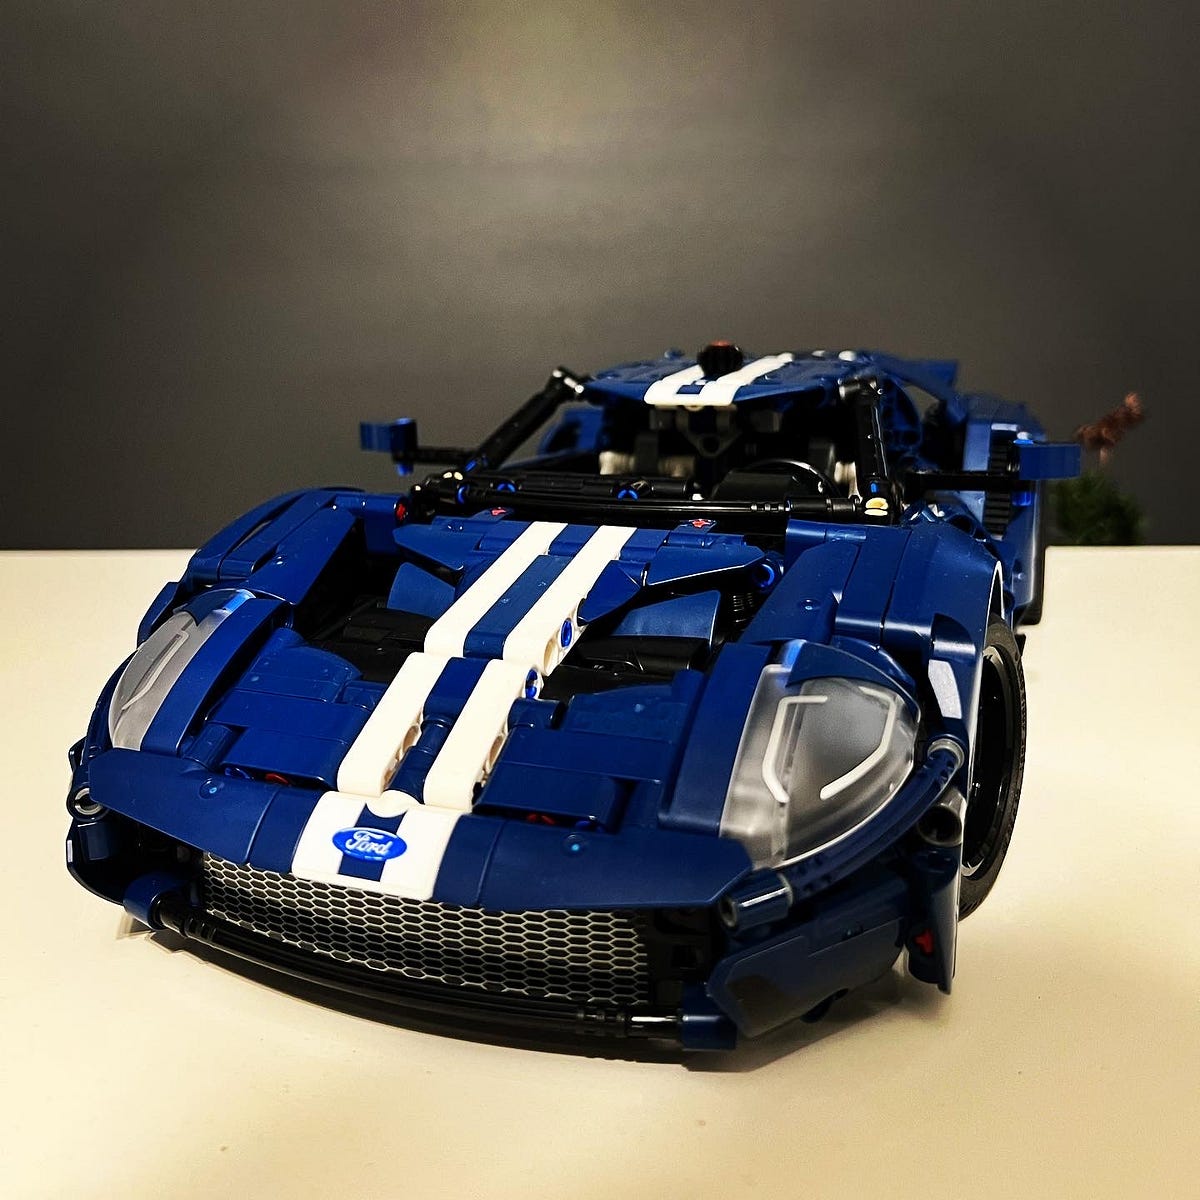 5 Things I Love About LEGO's 2023 Ford GT